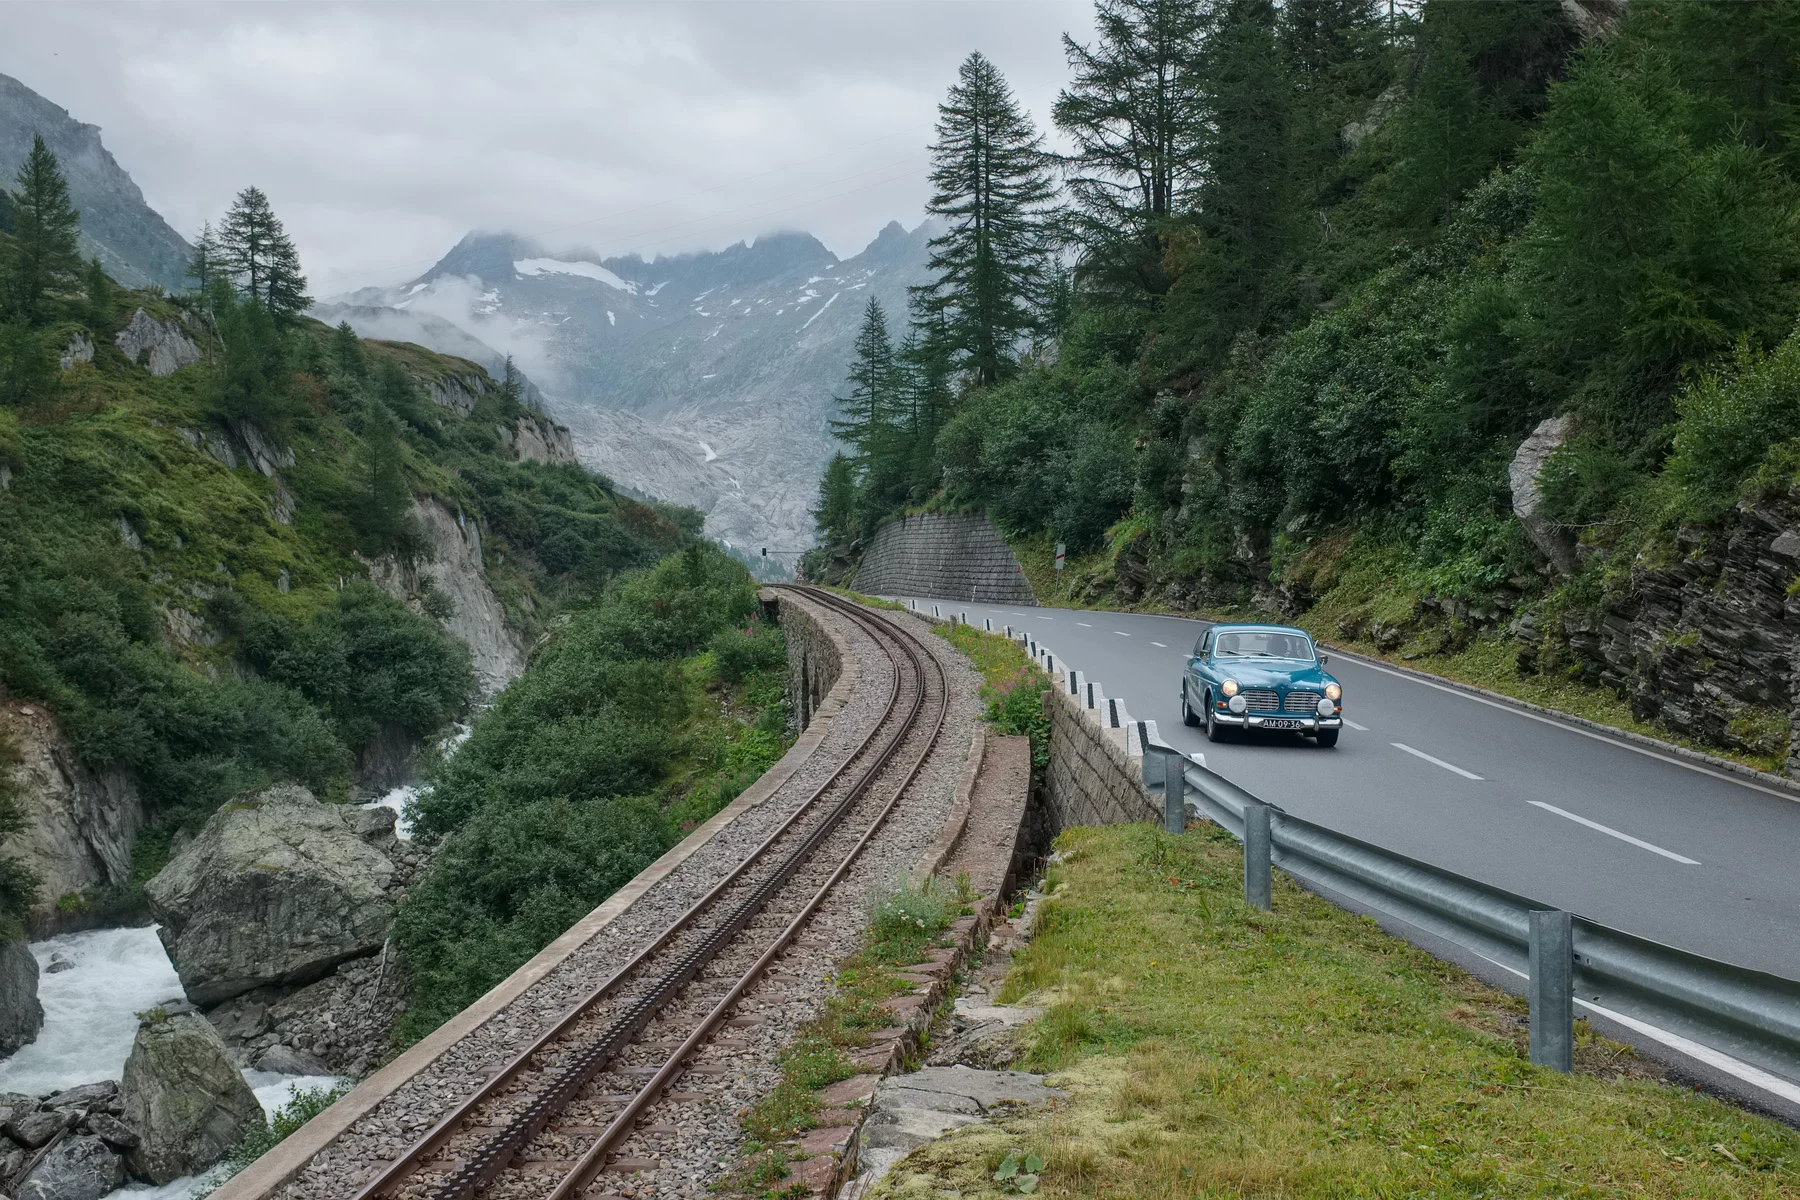 drive in switzerland with us license